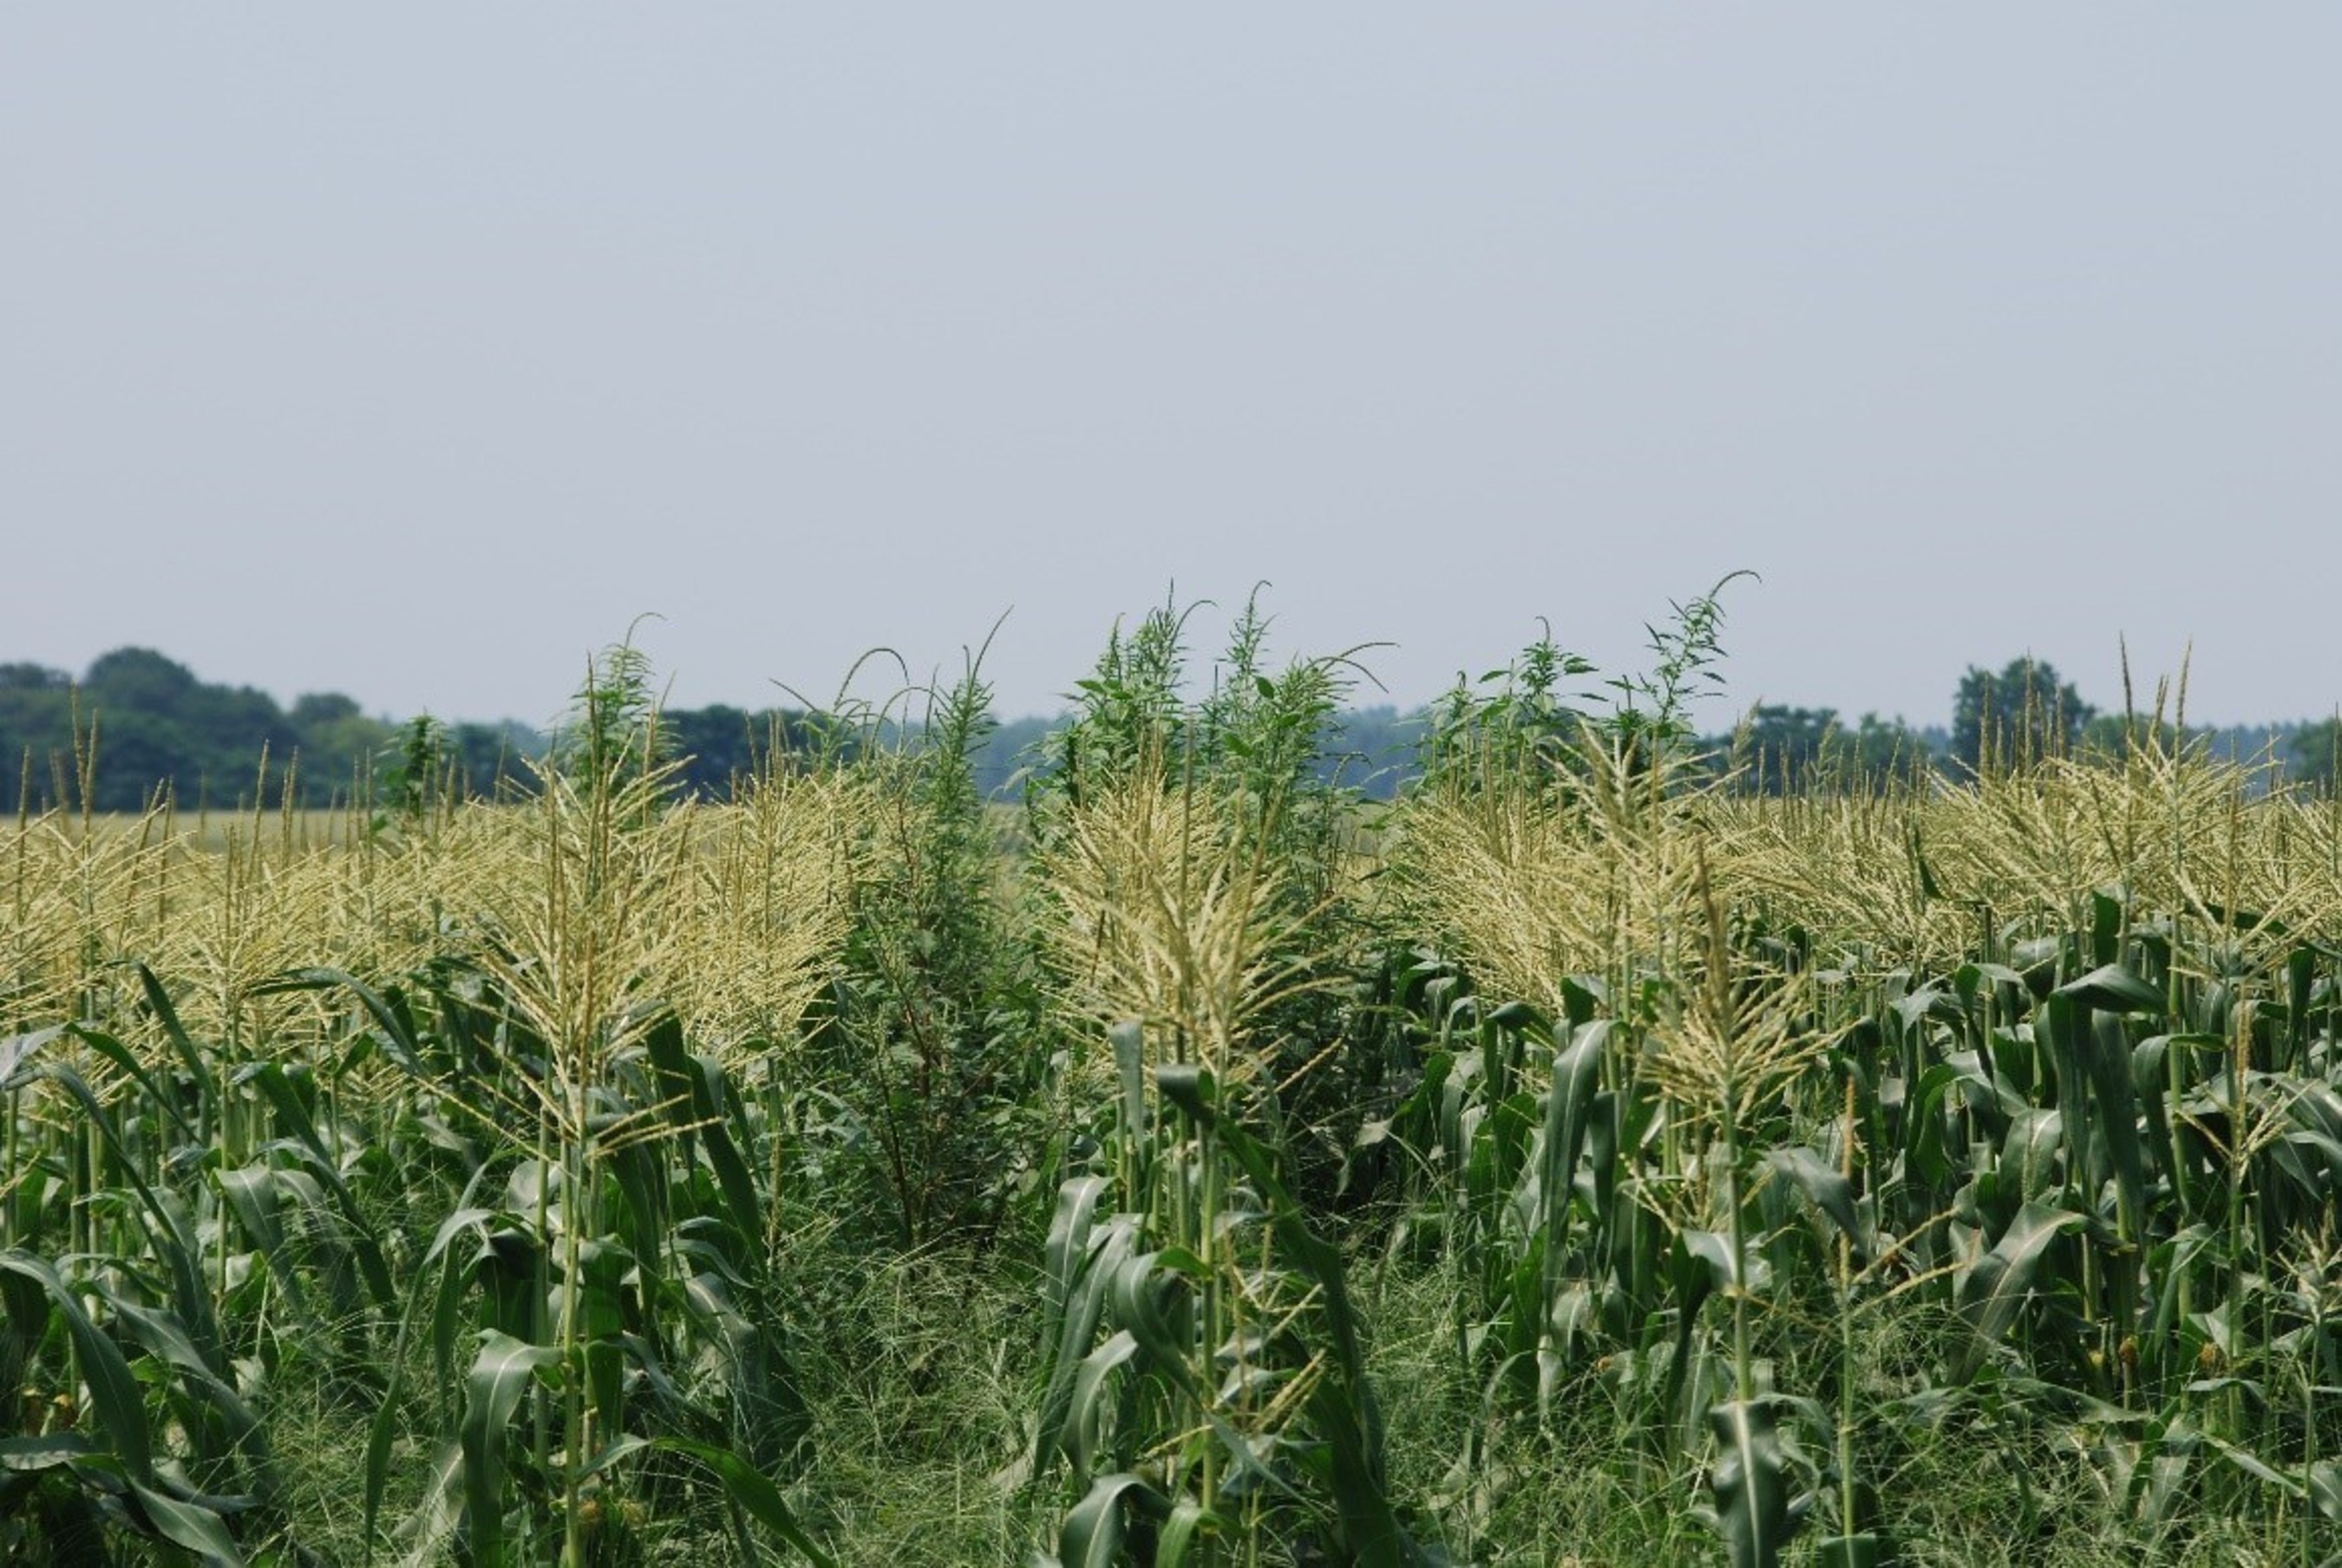 Corn growers regularly fight invasive weed species like this Palmer amaranth.